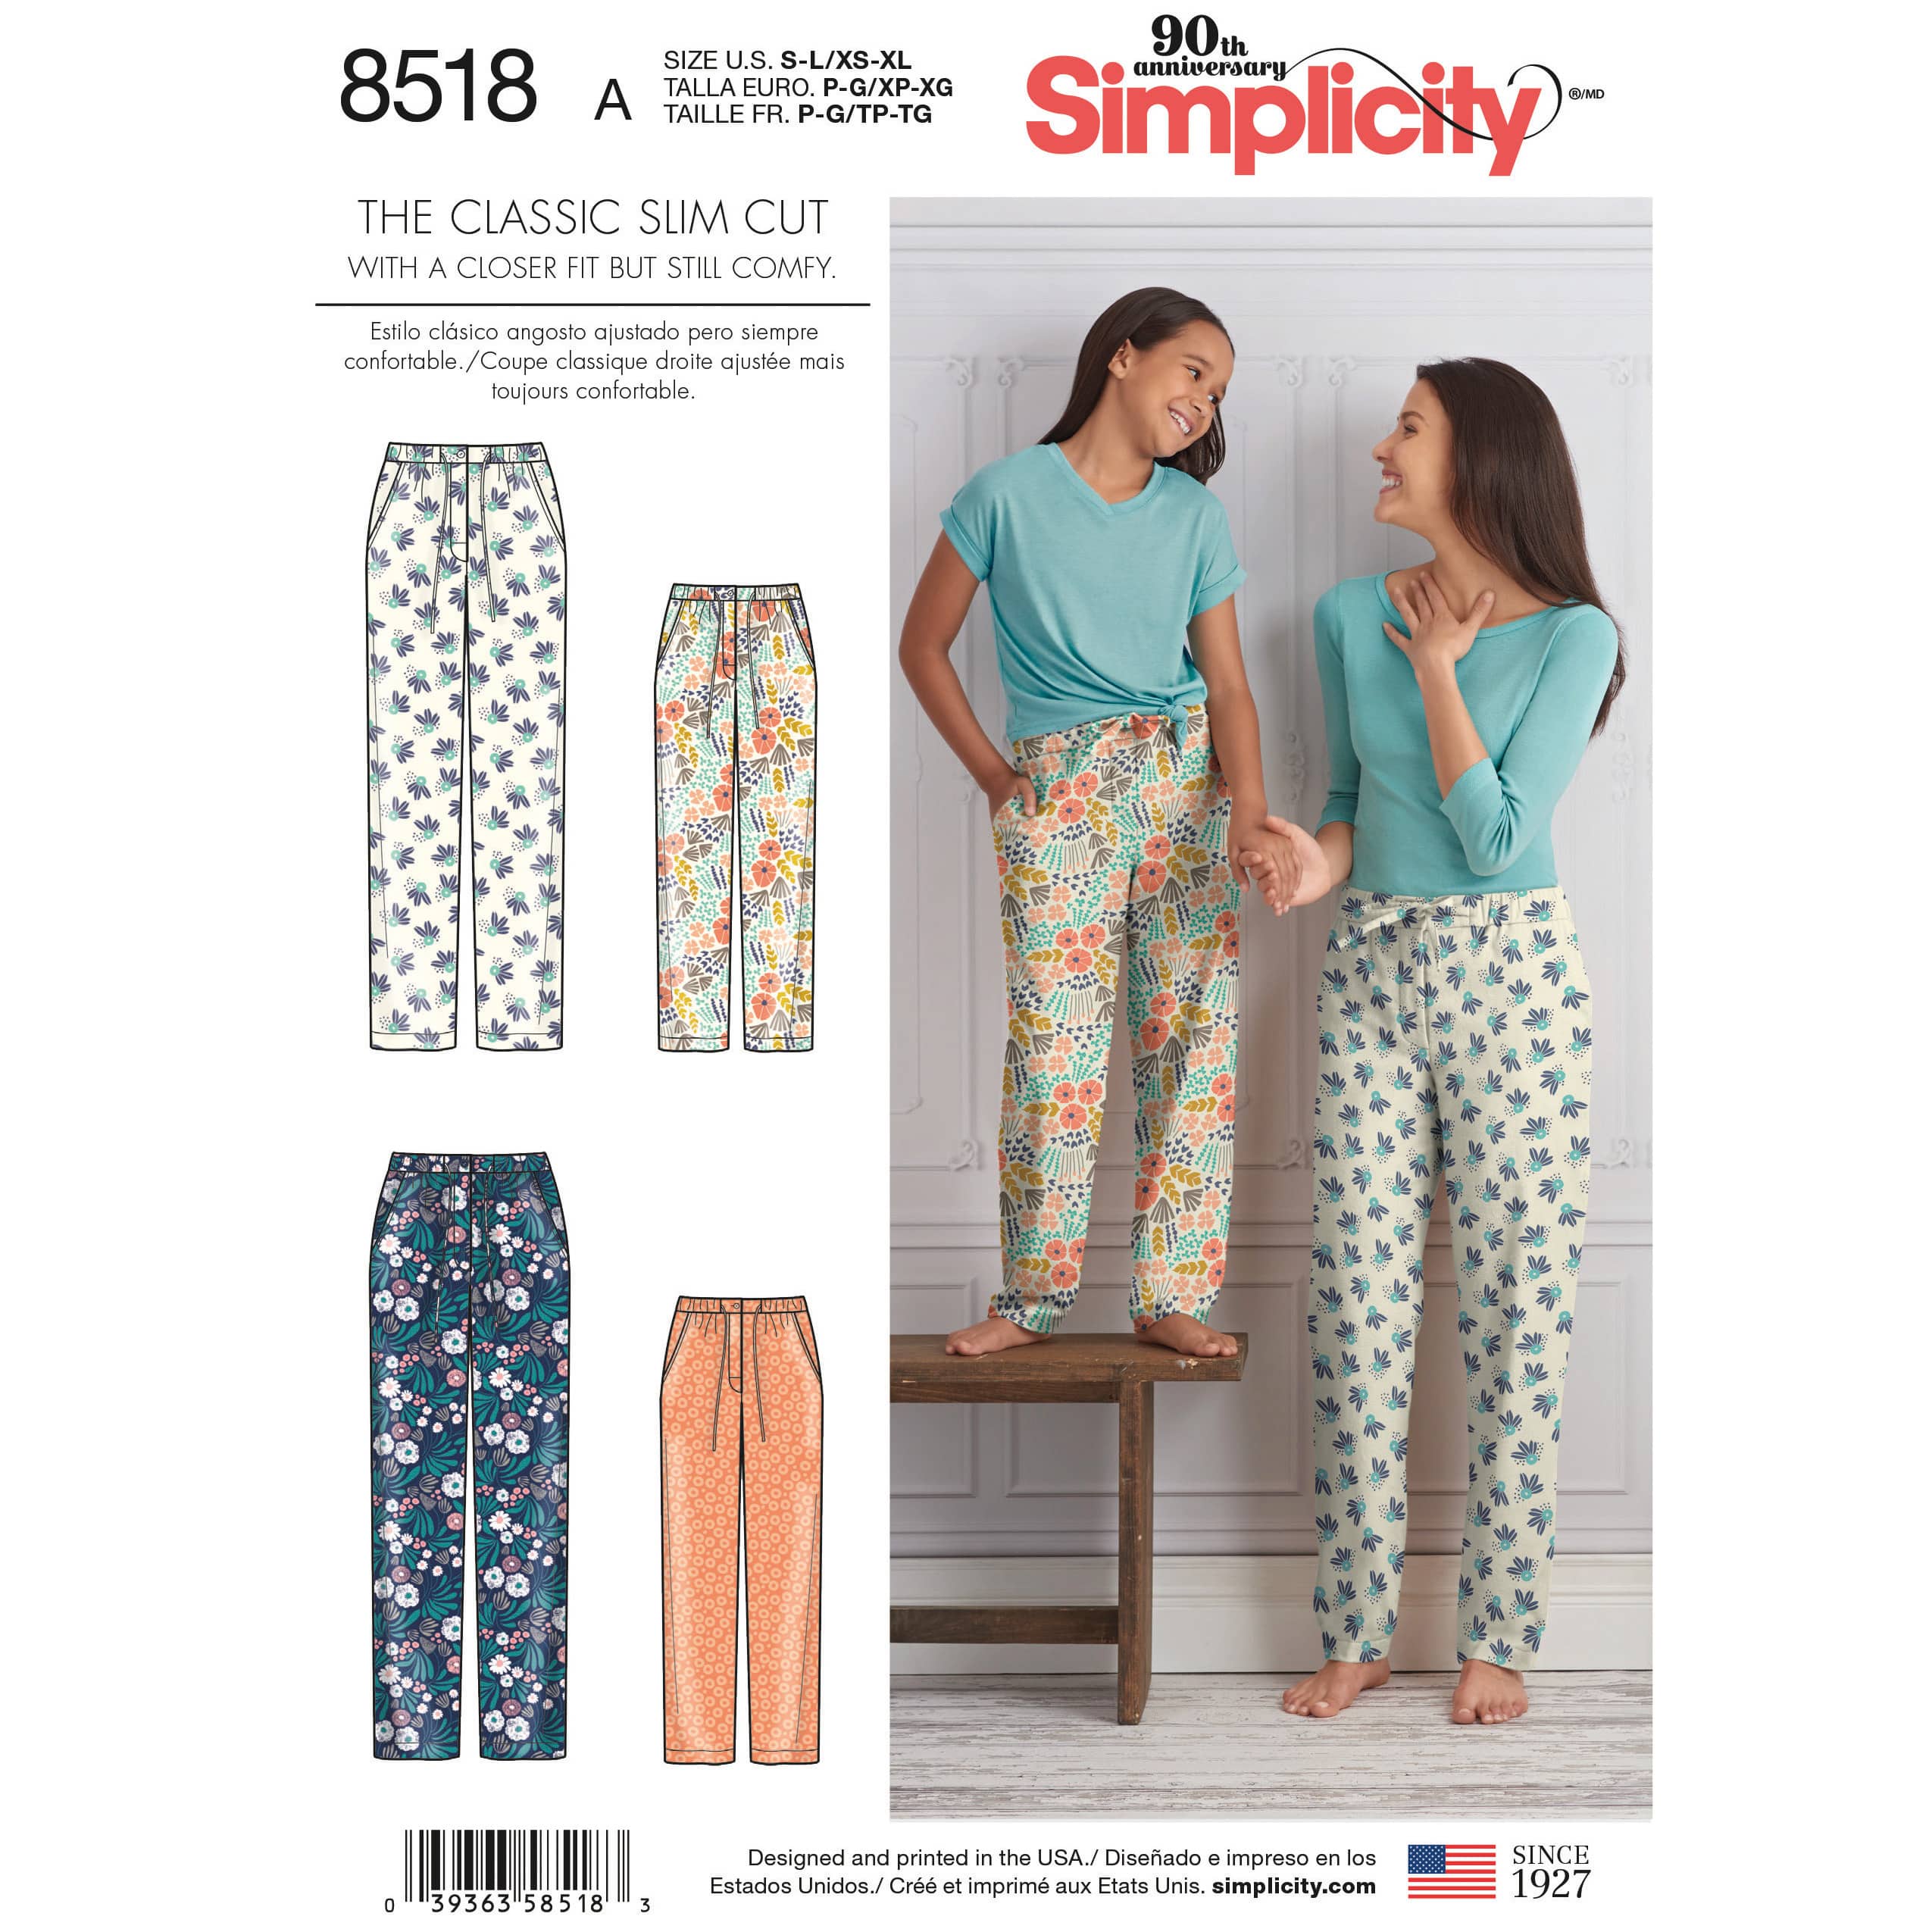 Purchase Simplicity 5508 Wrap-around Pants and read its pattern reviews.  Find other sewing patterns.